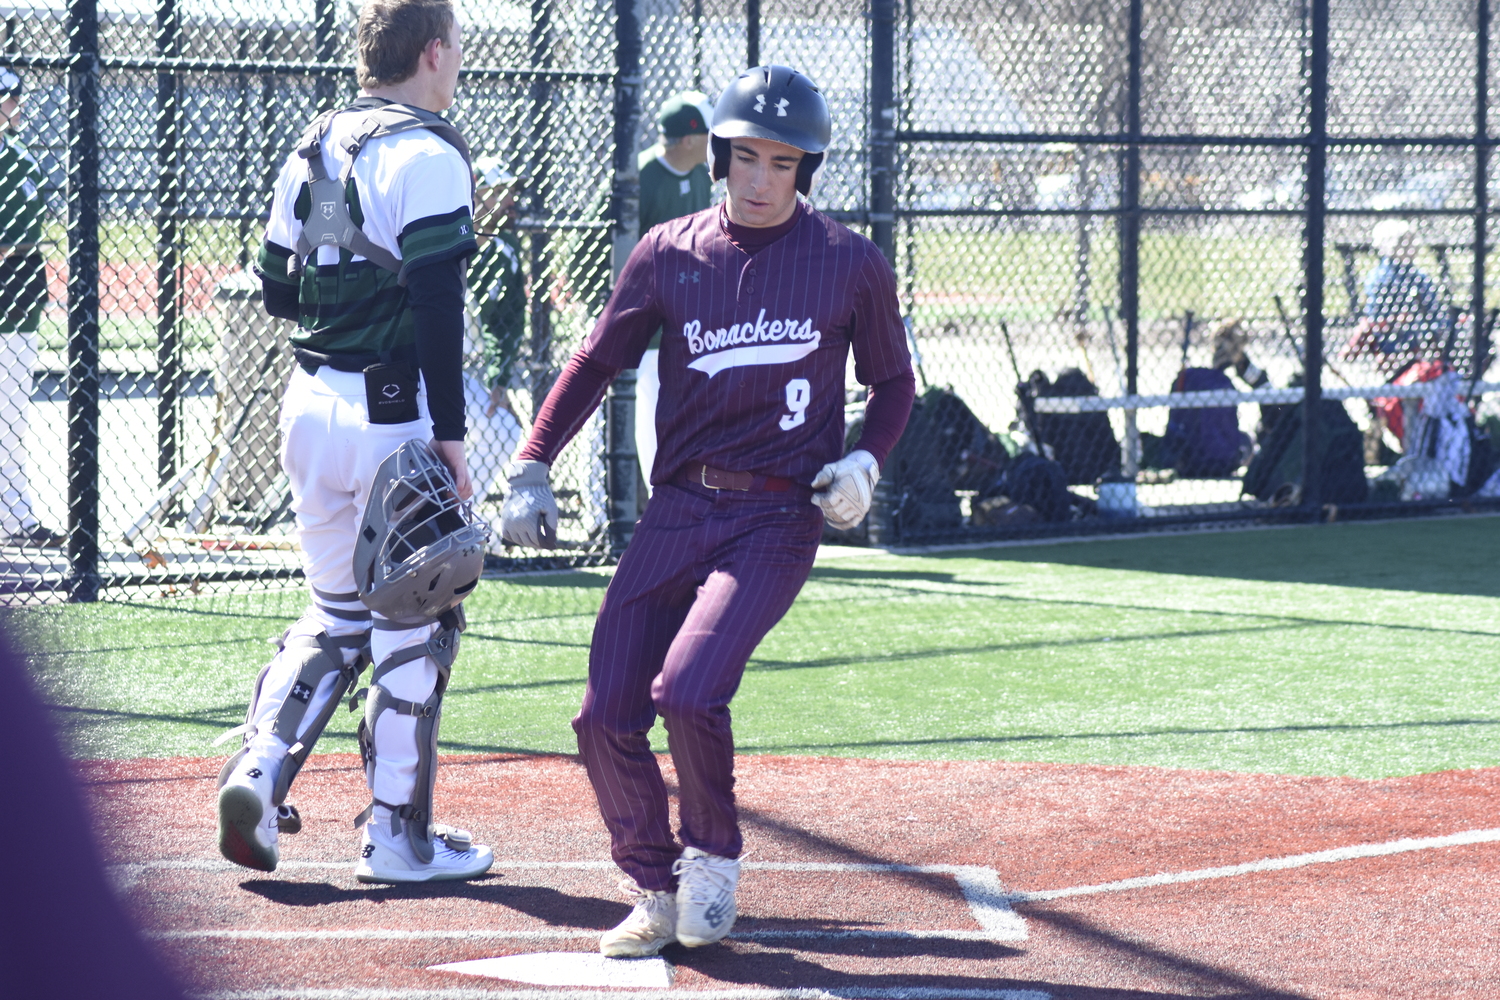 Justin Prince scores as part of a big fifth inning for the Bonac offense on Saturday.   DREW BUDD